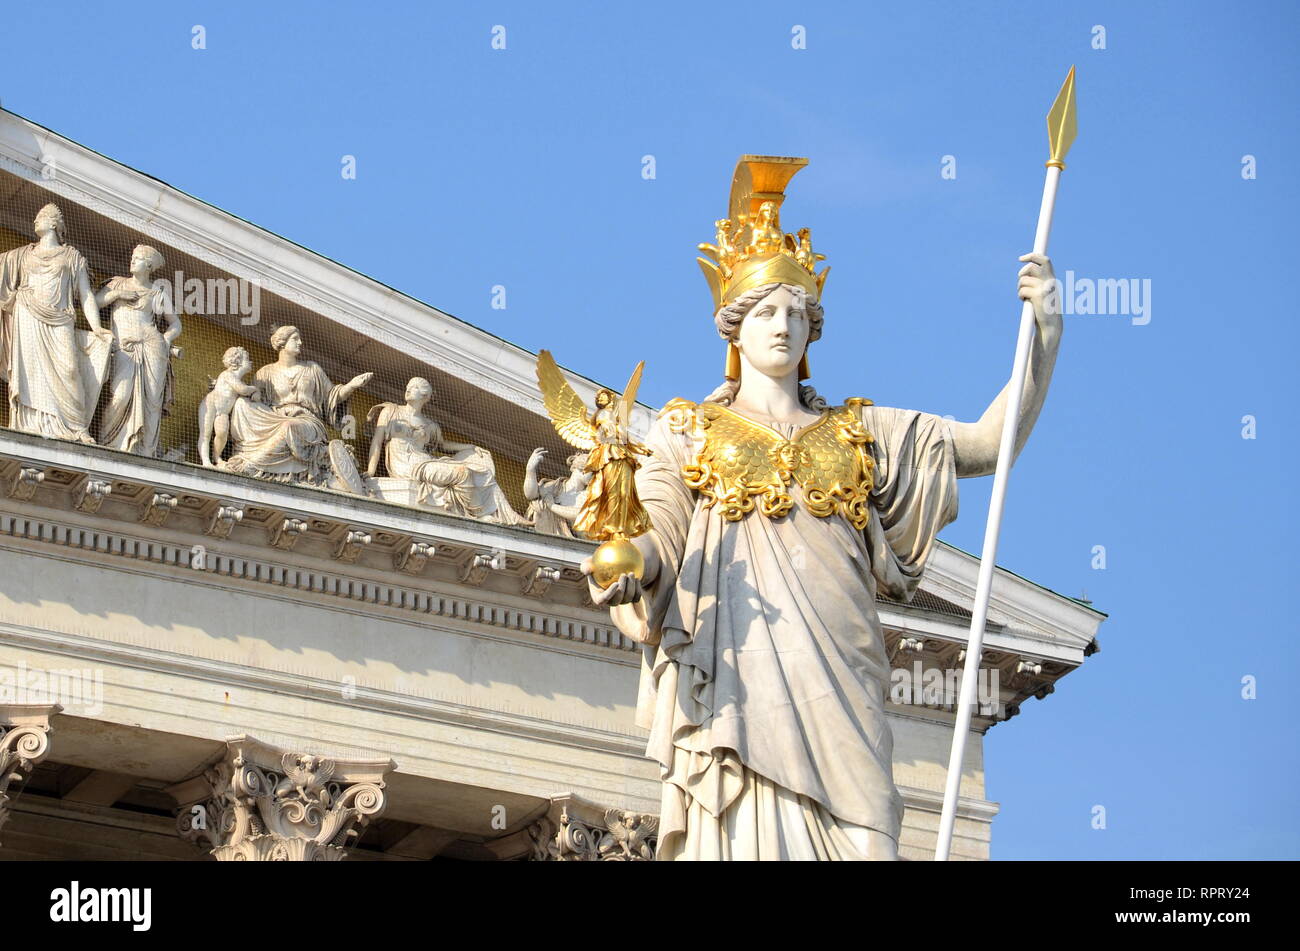 Pallas Athene, the goddess of wisdom holds a spear in her left ...